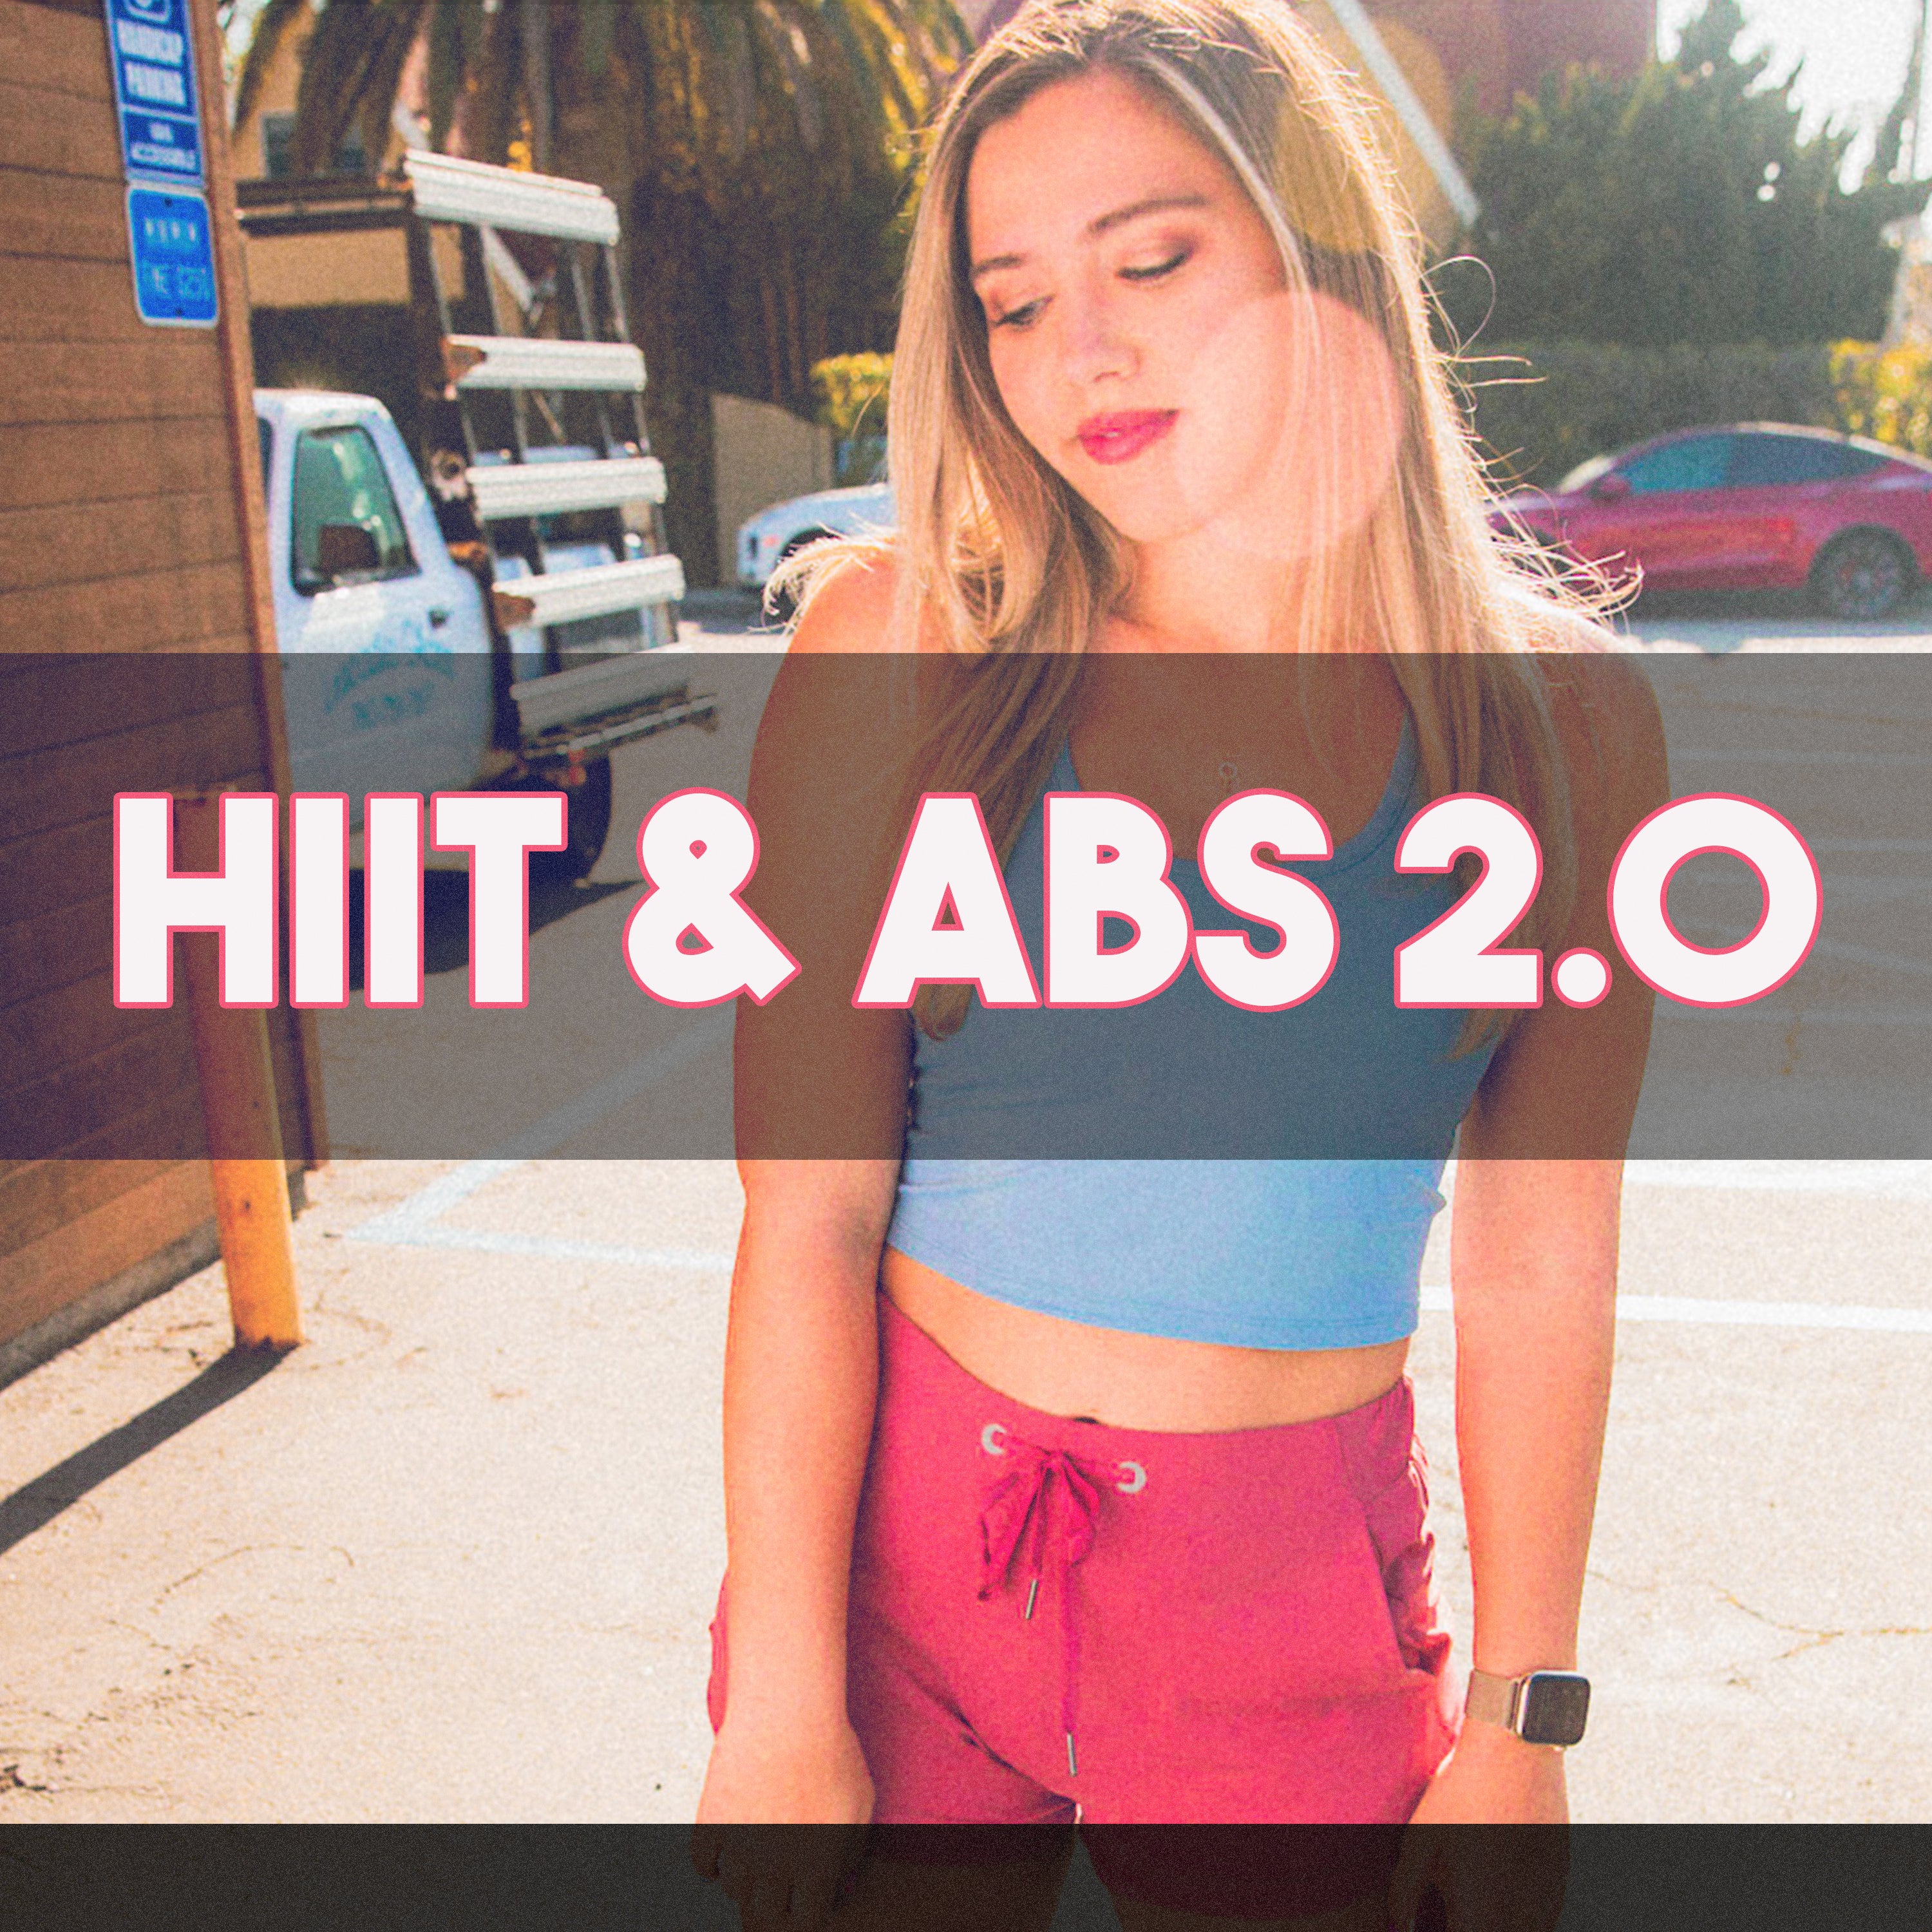 HIIT and ABS 2.0